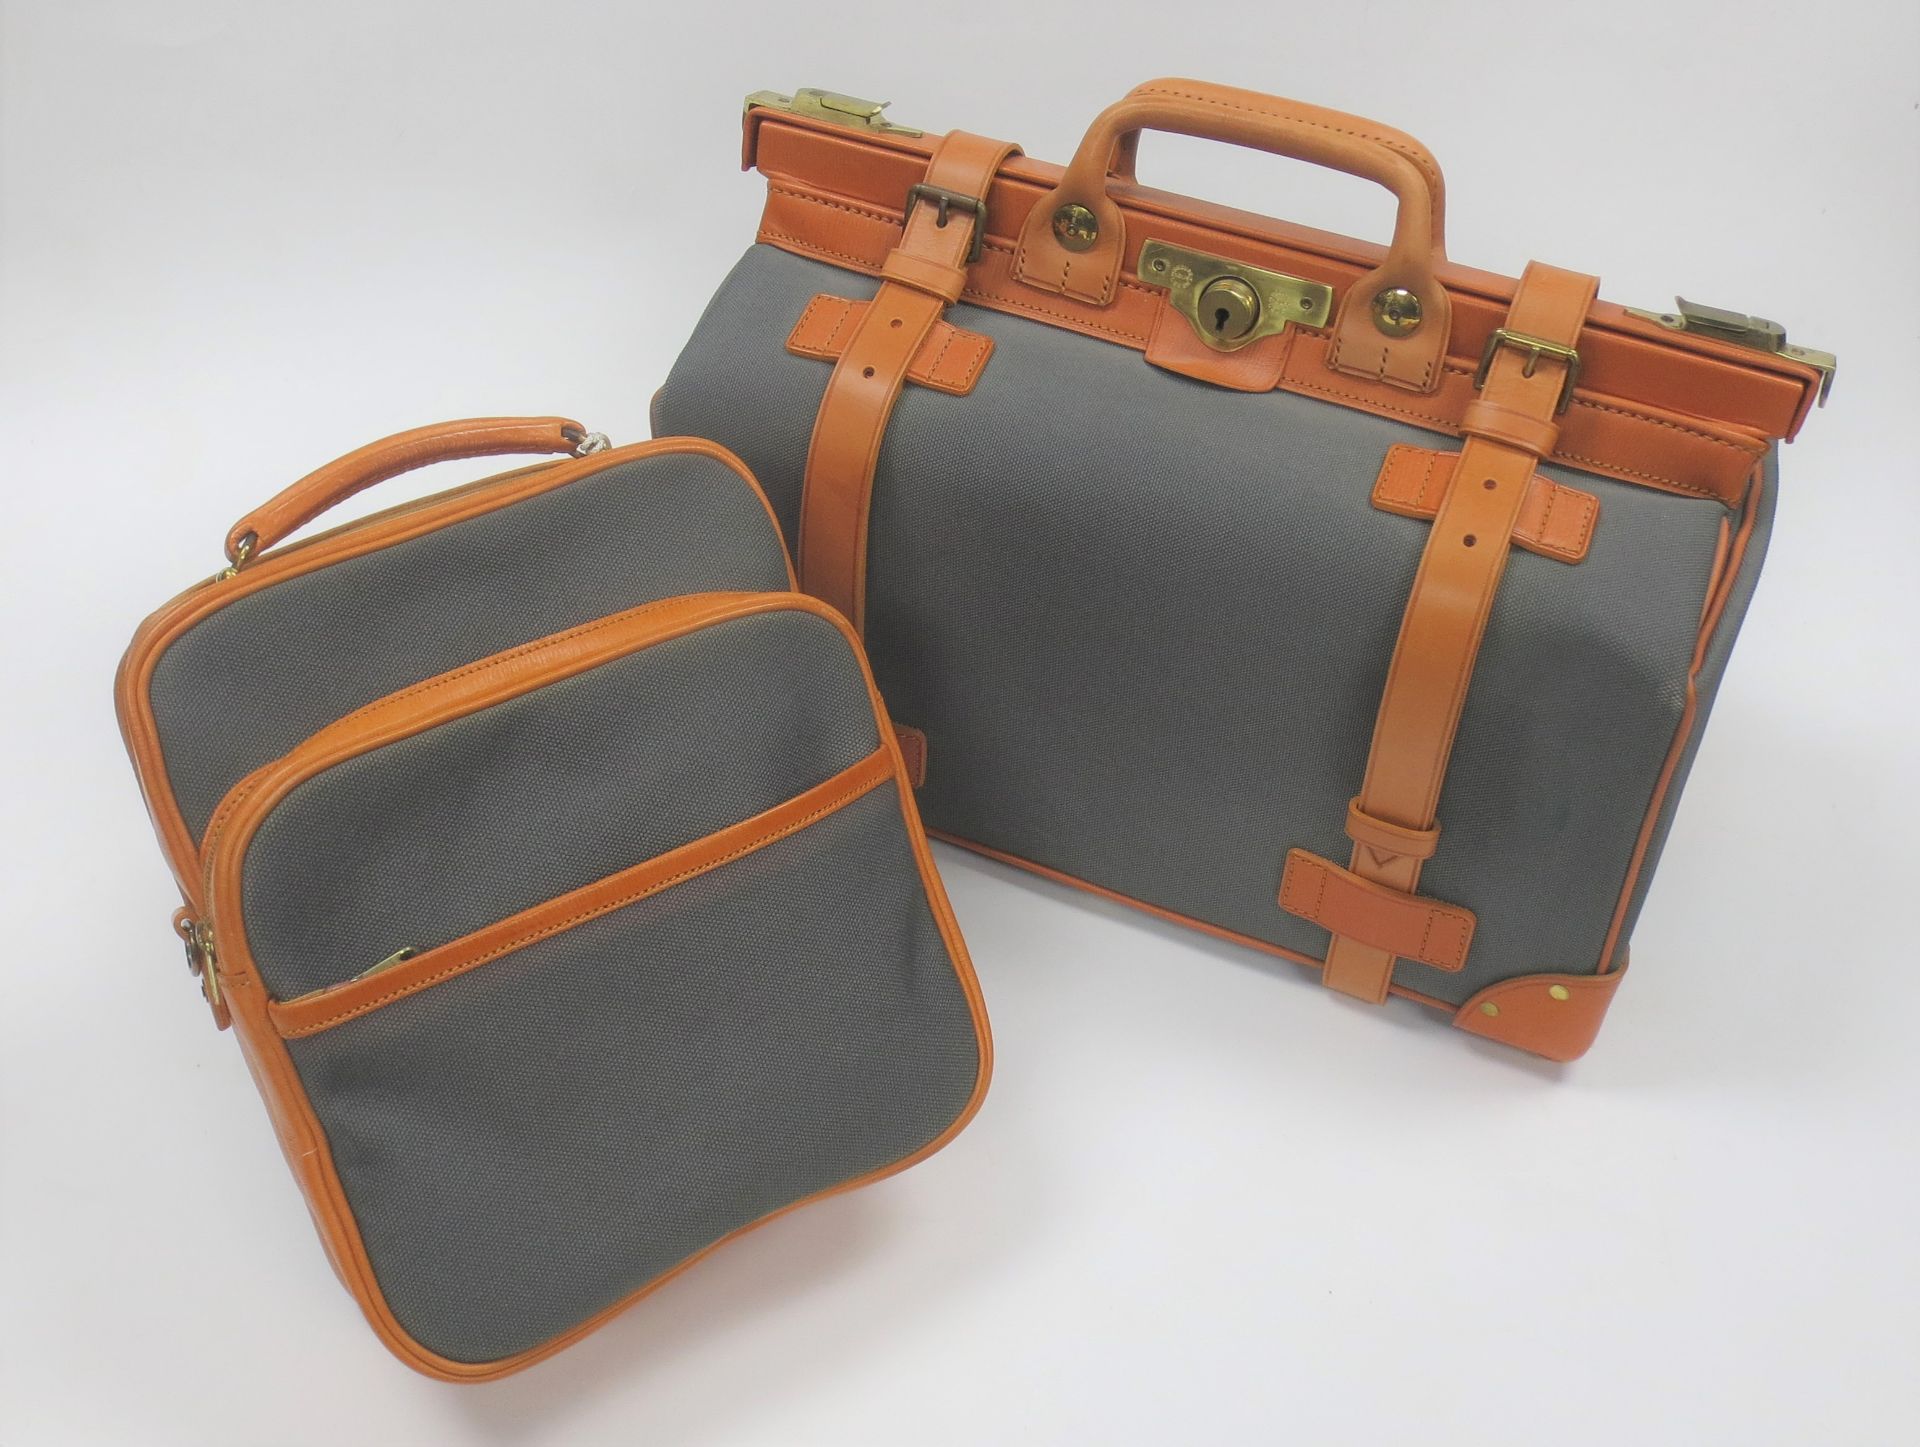 A leather and canvas Gladstone-bag by Tanner Krolle, retailed by Fortnum & Mason